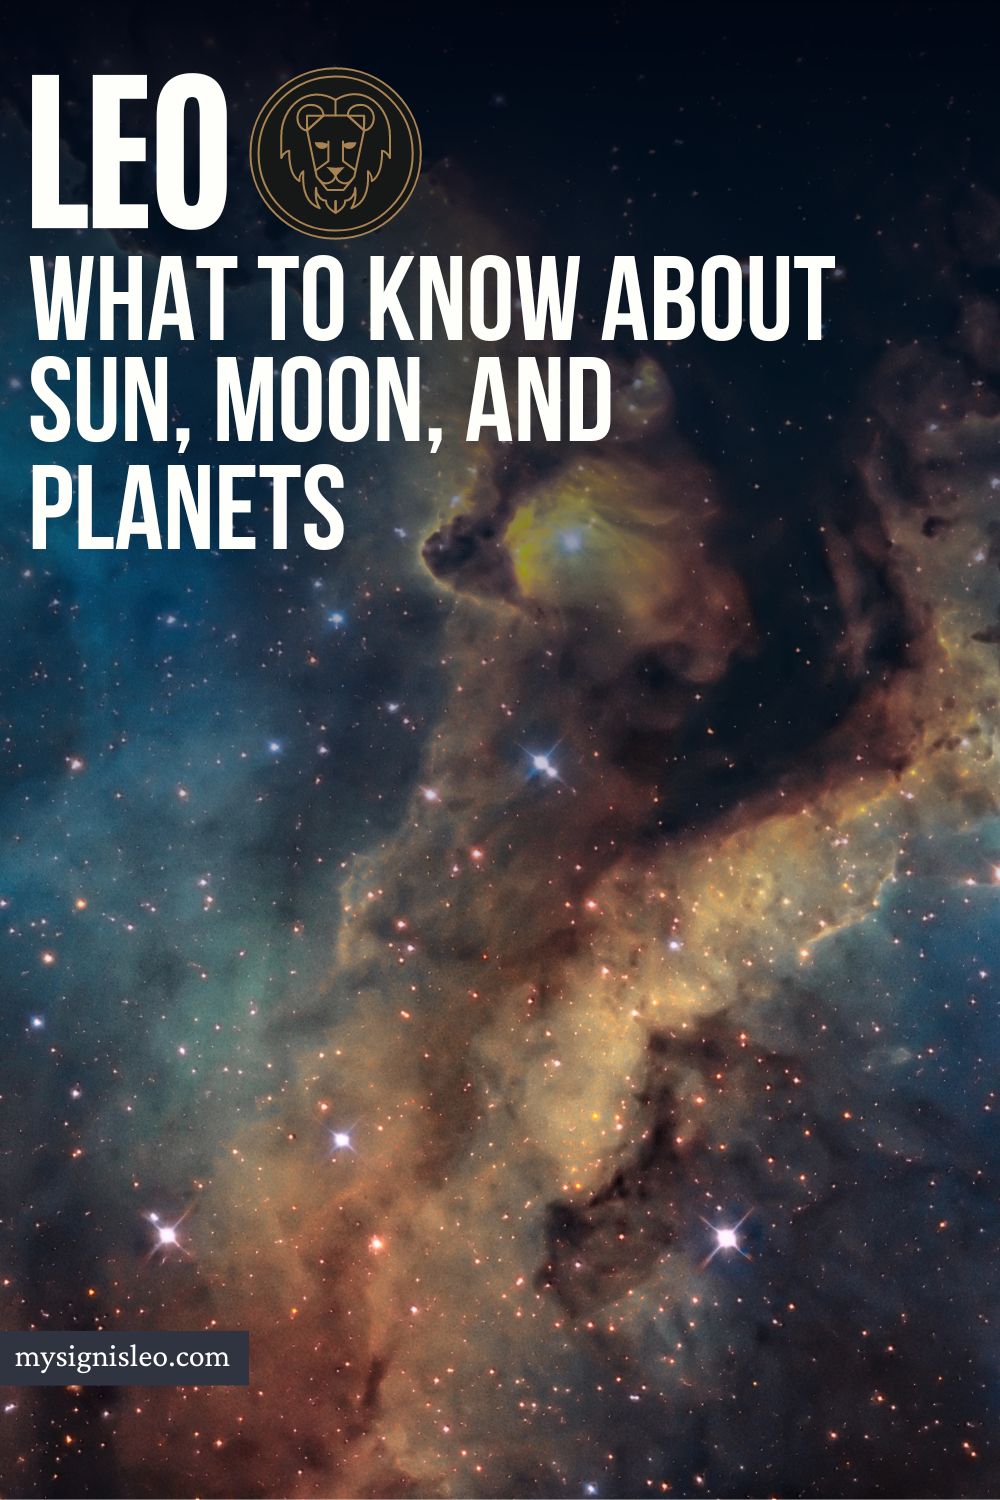 What To Know About Sun, Moon, And Planets In Leo Zodiac Signs